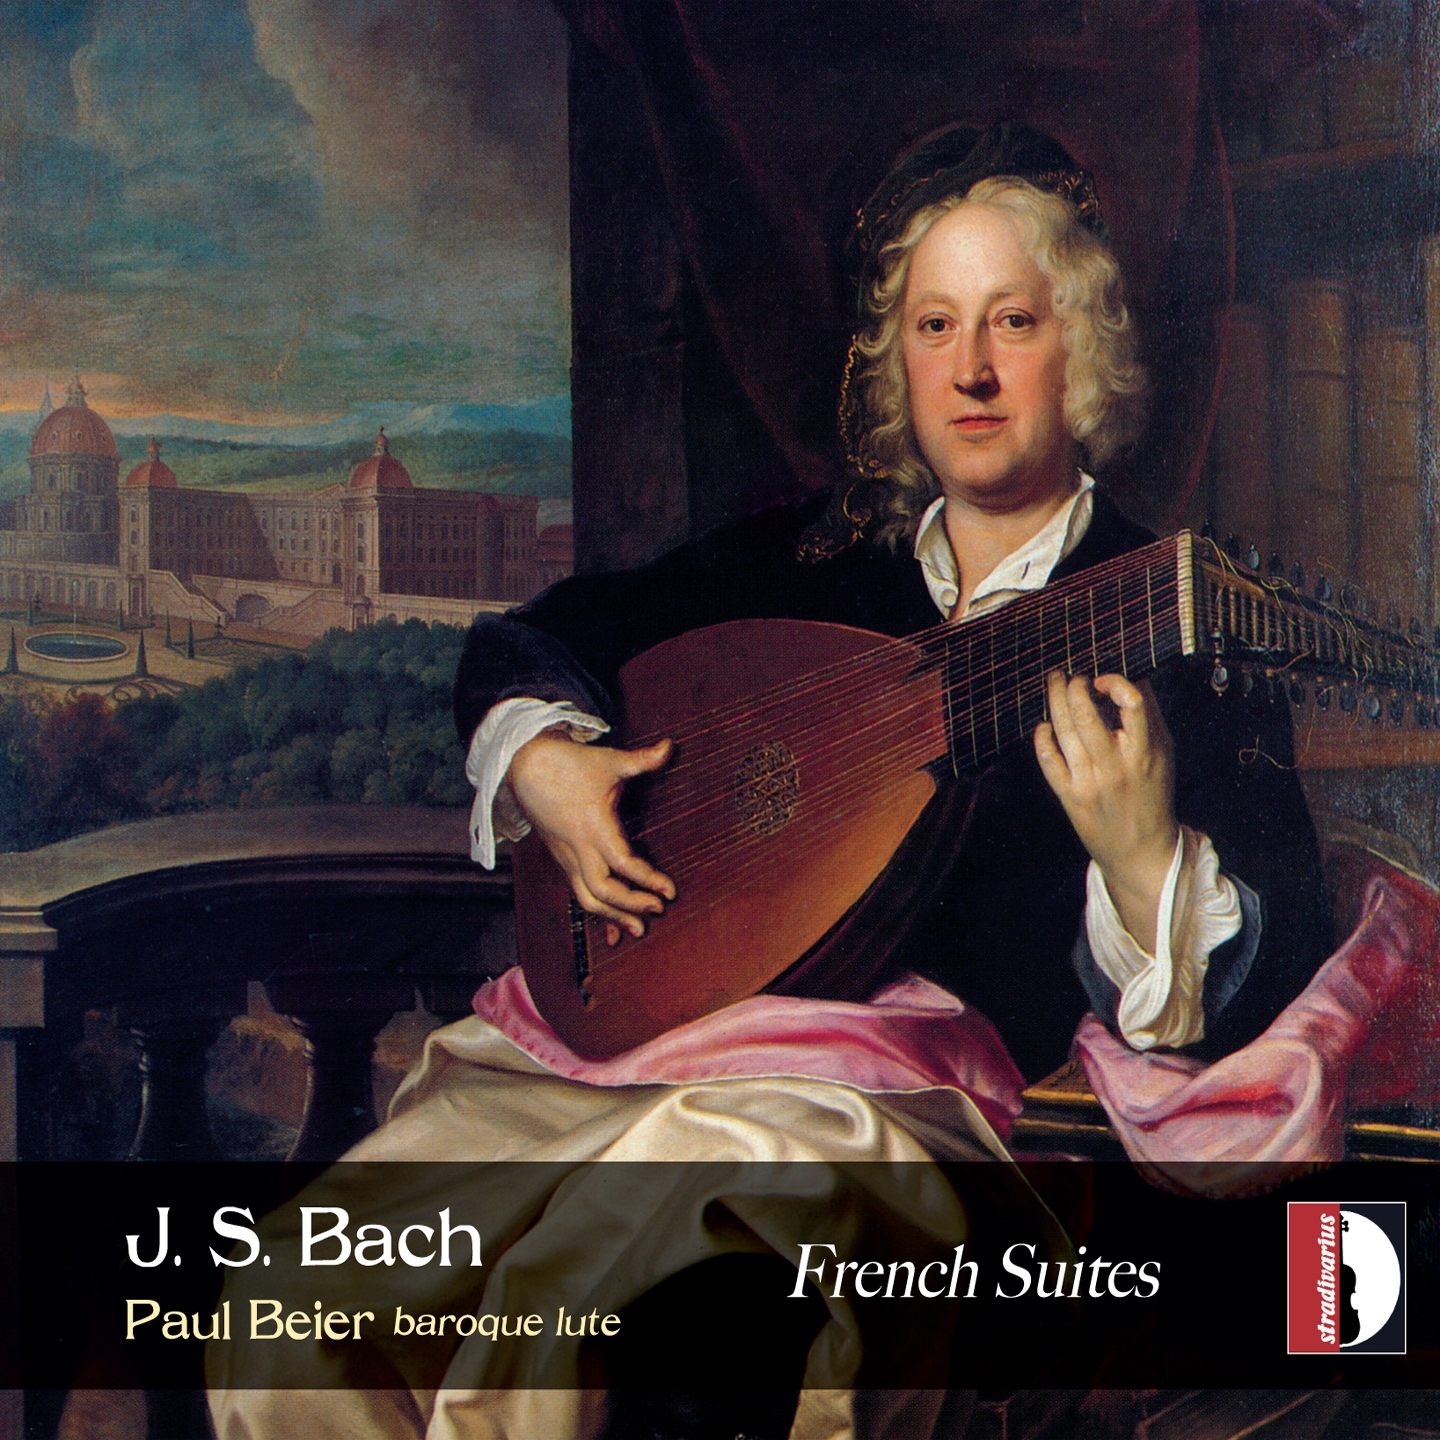 6 French Suites, No. 1 in C Minor, BWV 812: III. Sarabande (Transcription for Lute)